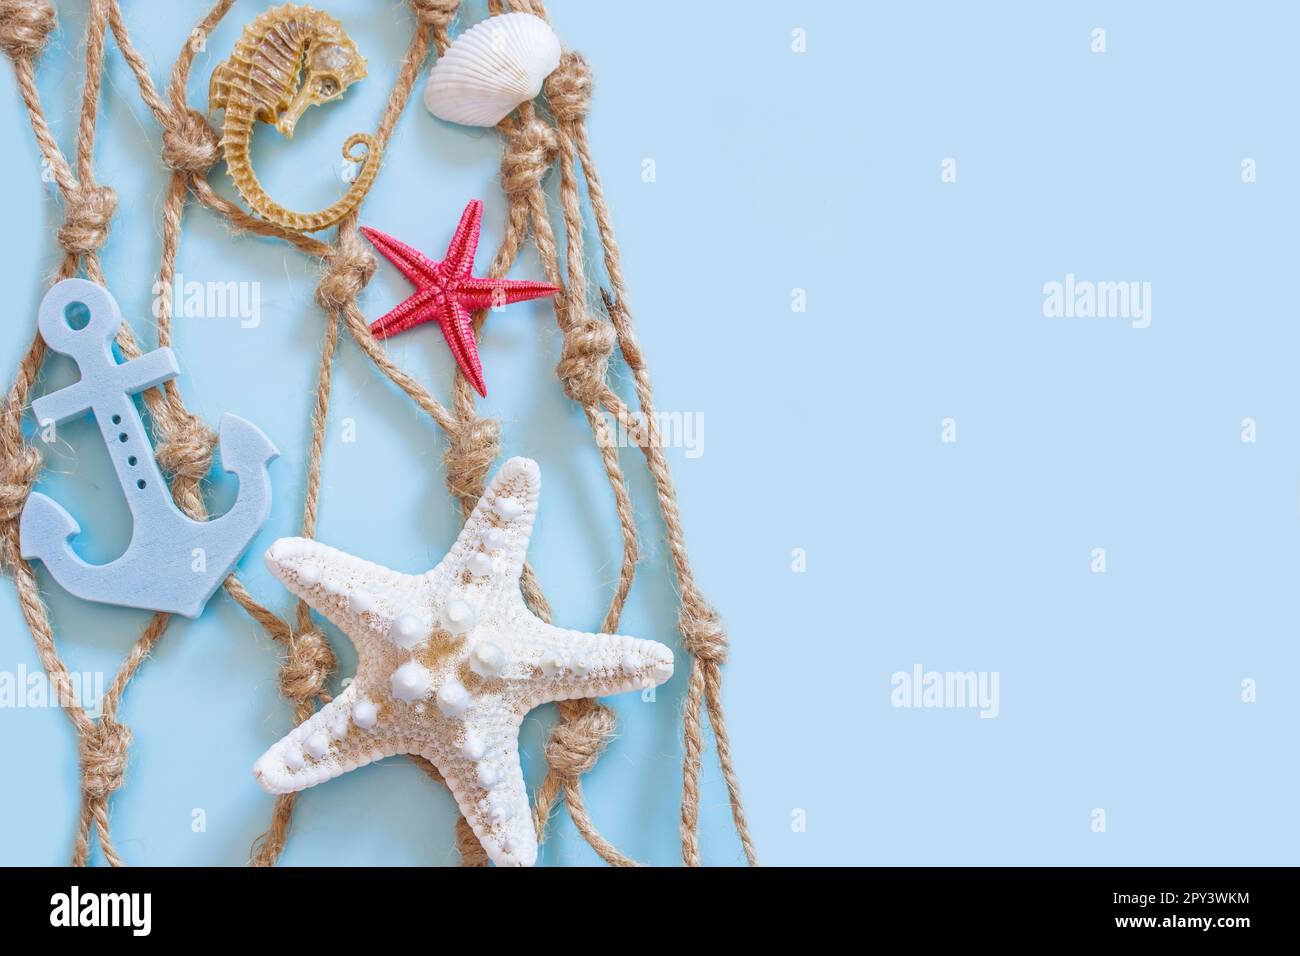 fishing net on the right side of the image, with a white and a red starfish, a seahorse, a blue anchor and shells, on a blue background Stock Photo